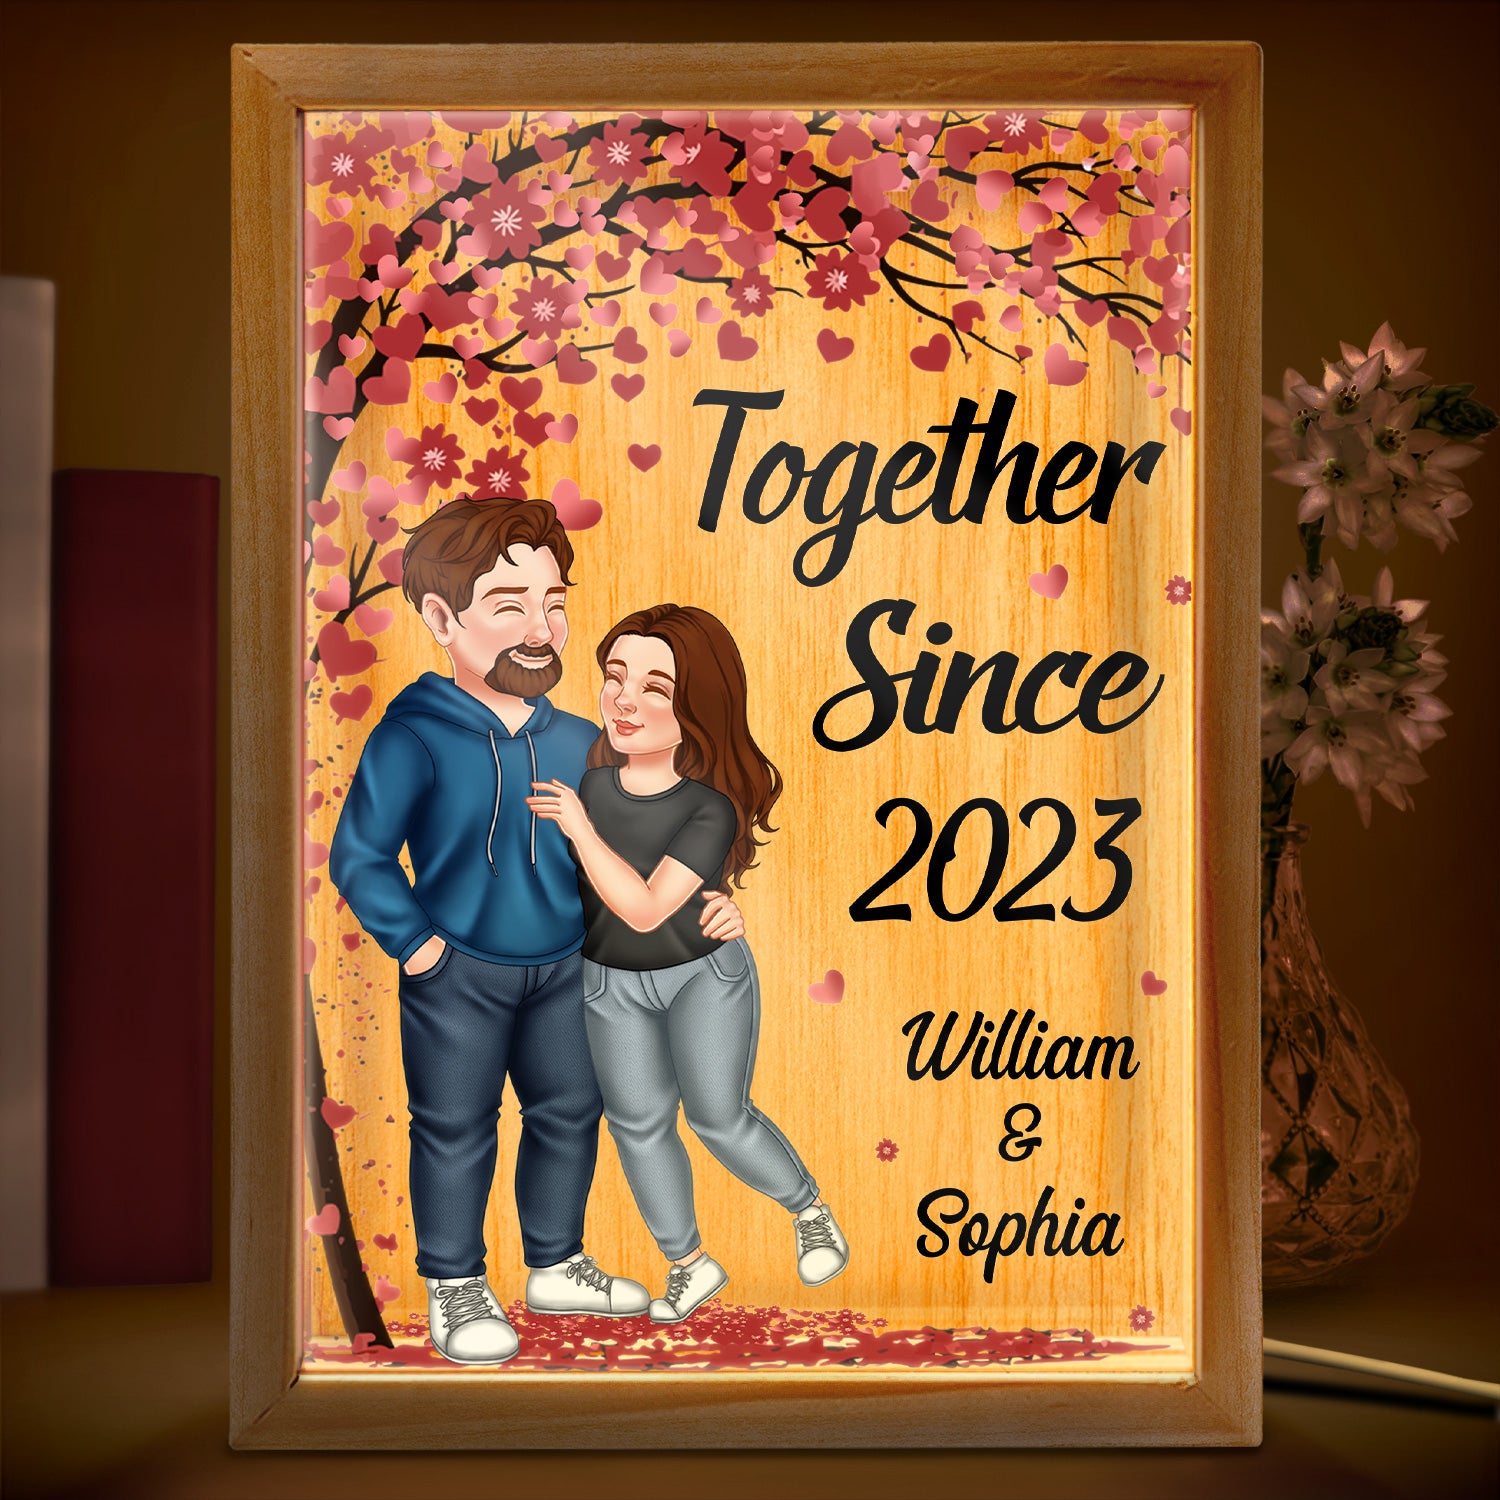 Together Since Arm In Arm - Loving, Anniversary Gift For Couples, Husband, Wife - Personalized Picture Frame Light Box